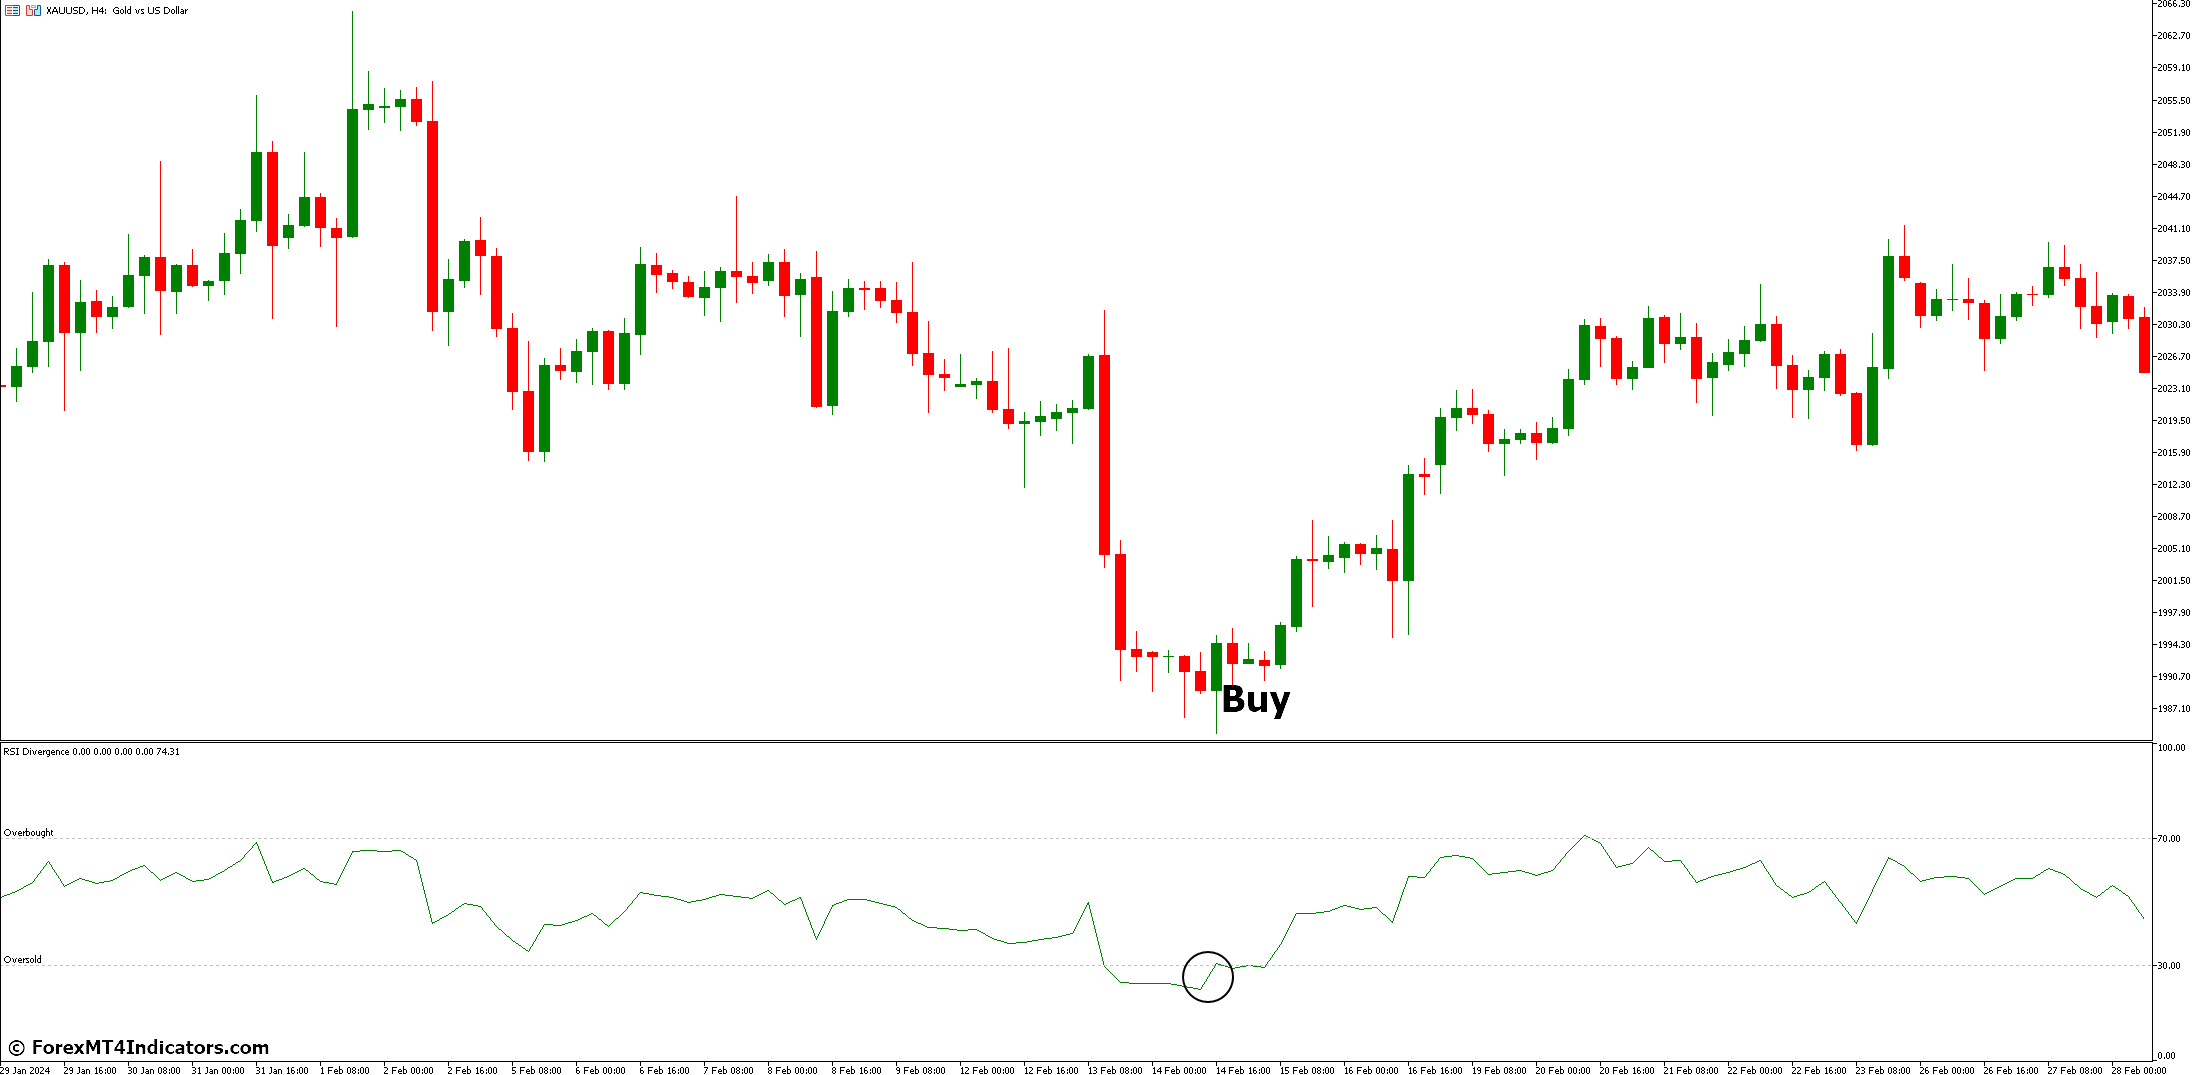 How to Trade with RSI Divergence Indicator - Buy Entry